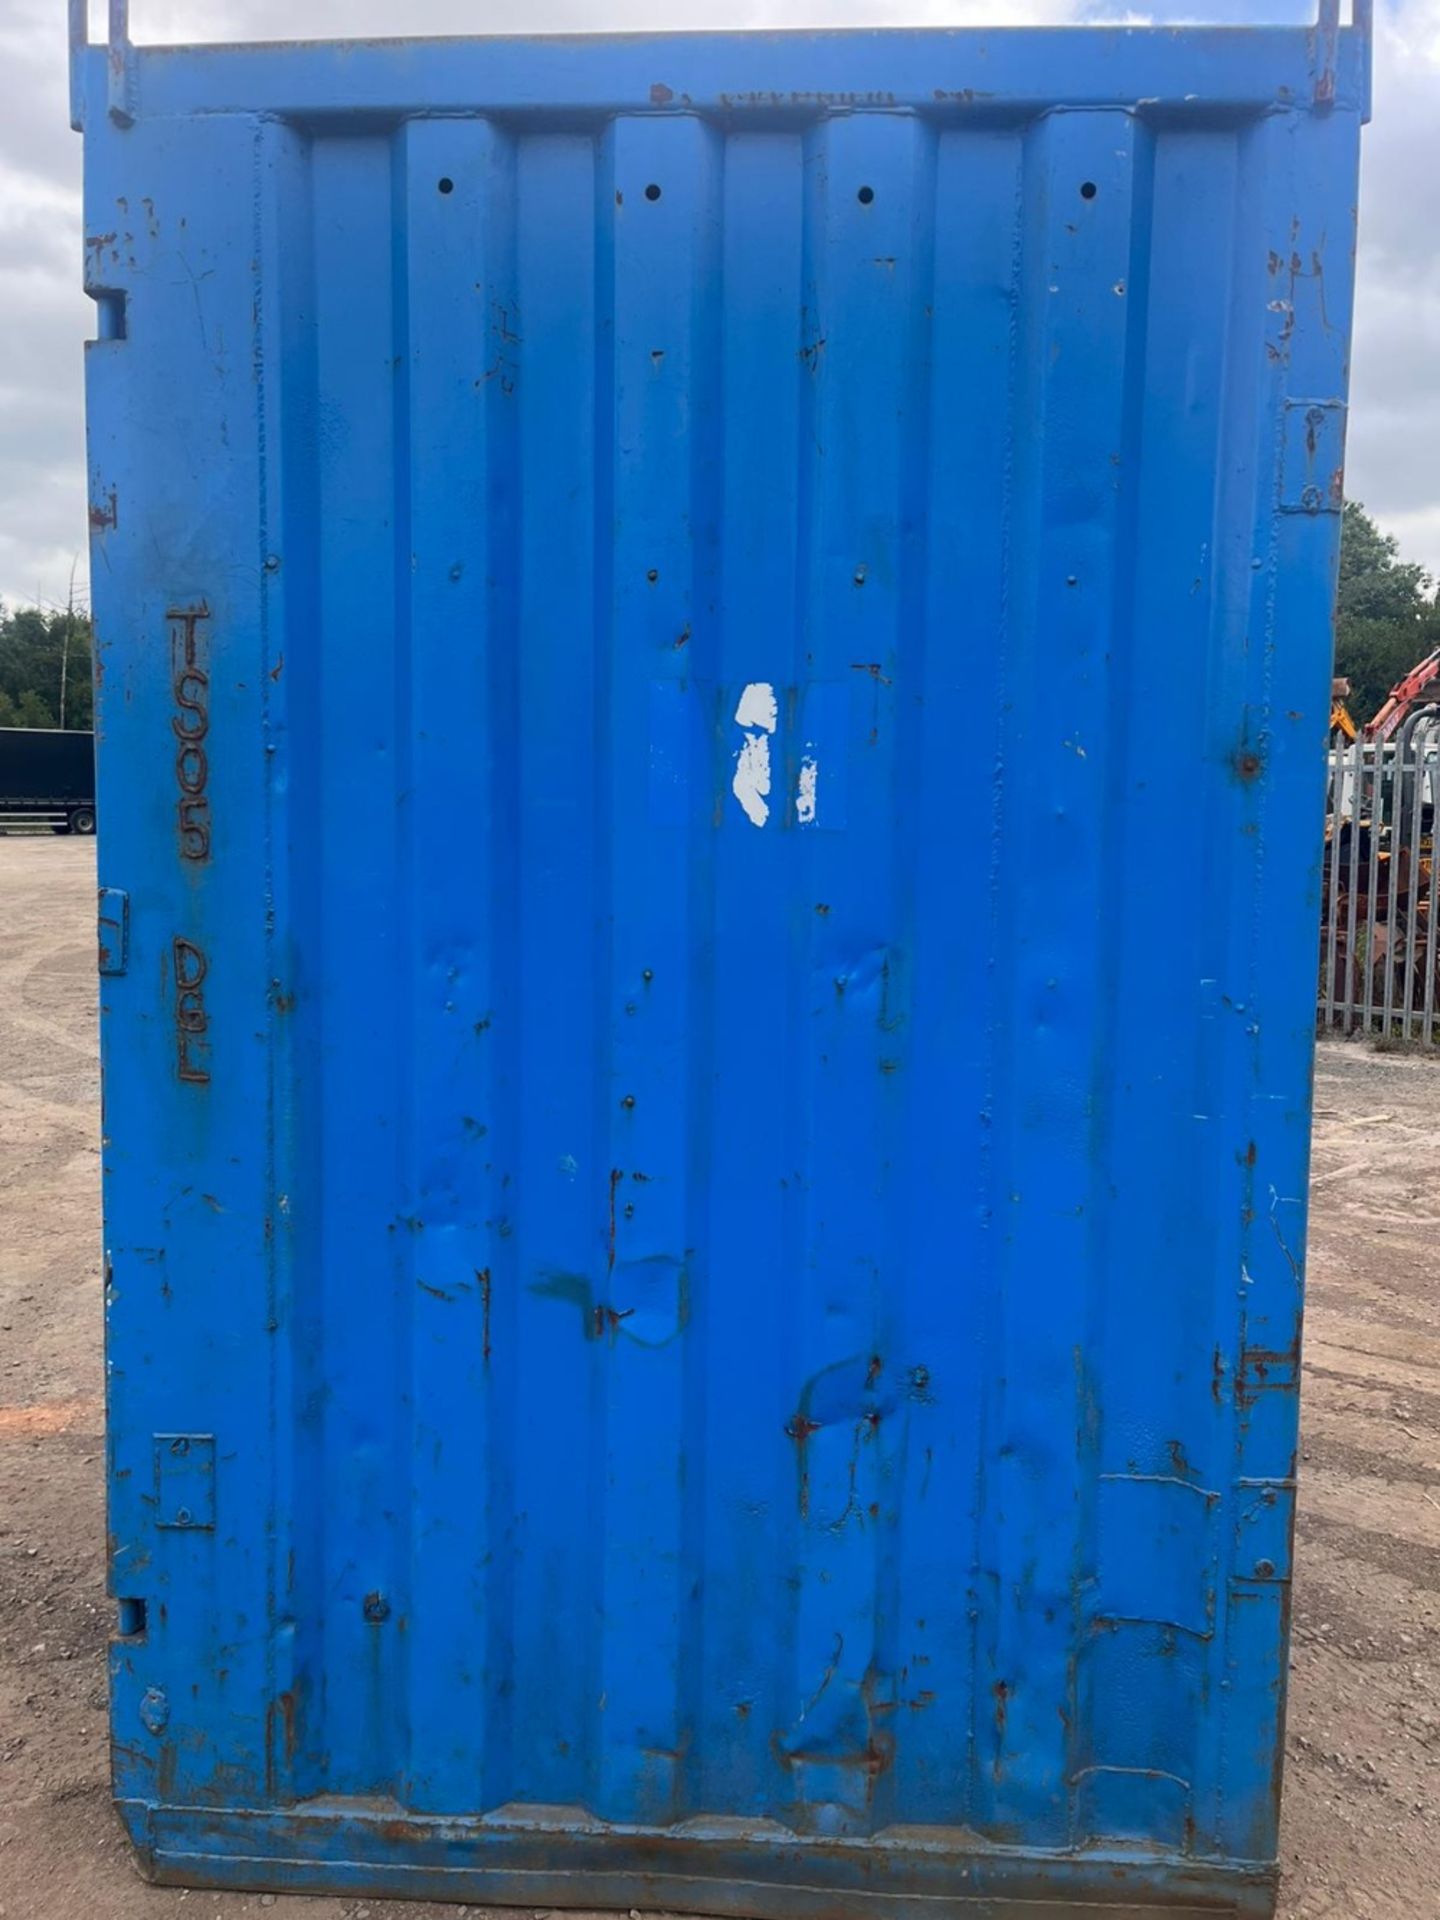 SECURE LOCKABLE STEEL VAULT CONTAINER 1.9X1.68 X2.6 METRES HIGH - Image 2 of 6